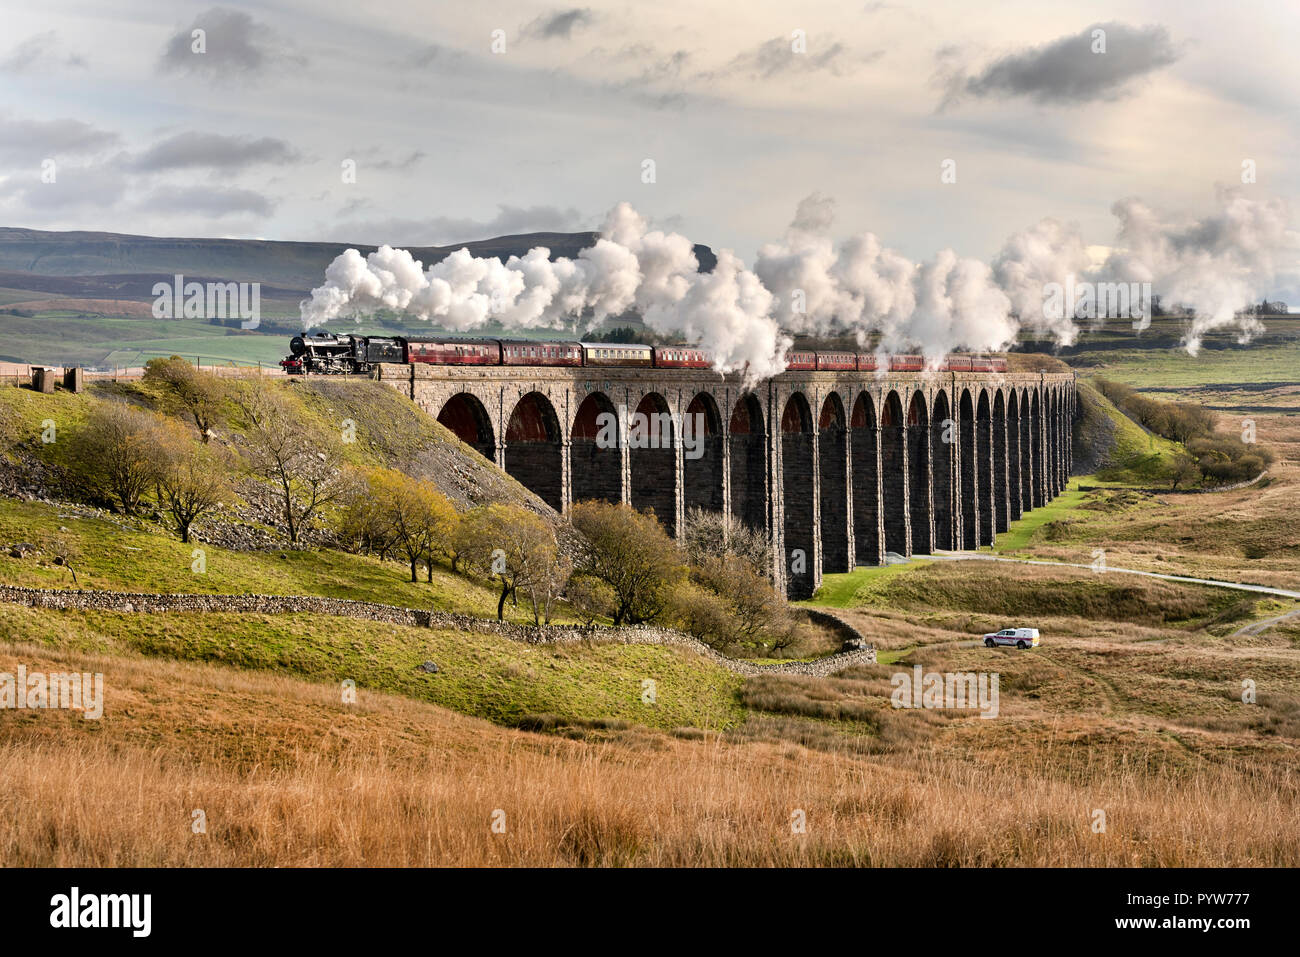 Ribblehead Viaduct, North Yorkshire, UK. 30th October, 2018. Under an Autumn sky 'The Dalesman' steam special crosses Ribblehead Viaduct in the Yorkshire Dales National Park. The train is en route to Carlisle on the famous Settle-Carlisle railway line. The train is hauled by a vintage Stanier 8F locomotive originally built for the London Midland and Scottish Railway Company (LMS). Credit: John Bentley/Alamy Live News Stock Photo